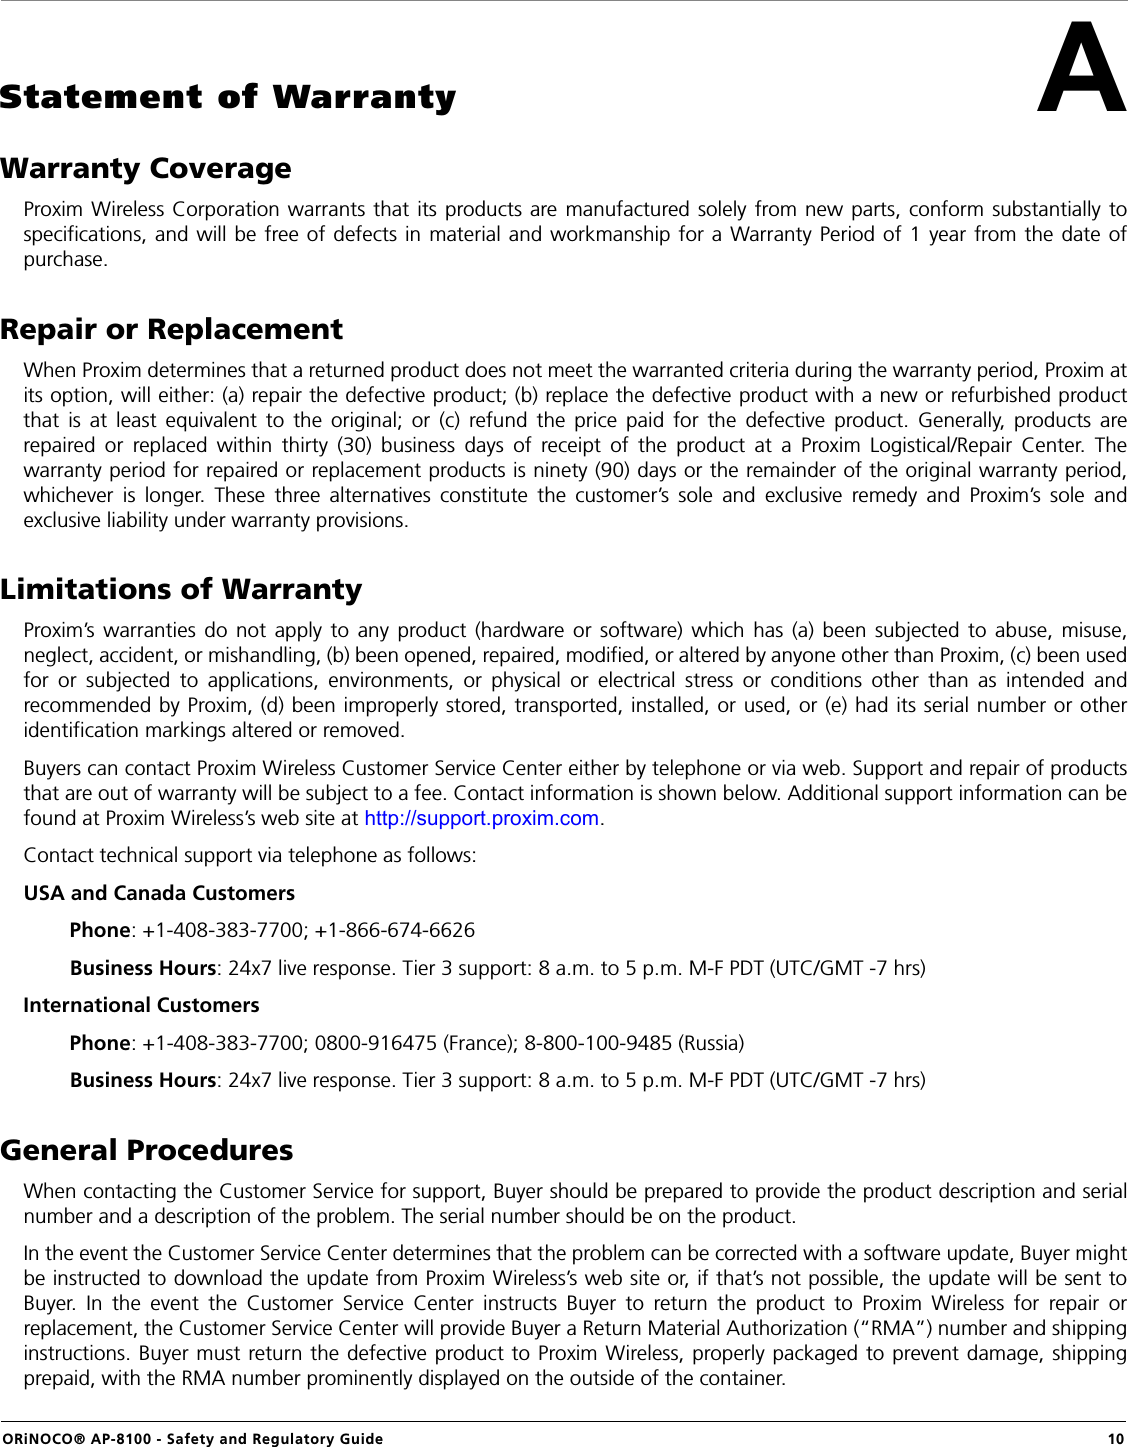 ORiNOCO® AP-8100 - Safety and Regulatory Guide  10AStatement of WarrantyWarranty CoverageProxim Wireless Corporation warrants that its products are manufactured solely from new parts, conform substantially tospecifications, and will be free of defects in material and workmanship for a Warranty Period of 1 year from the date ofpurchase.Repair or ReplacementWhen Proxim determines that a returned product does not meet the warranted criteria during the warranty period, Proxim atits option, will either: (a) repair the defective product; (b) replace the defective product with a new or refurbished productthat is at least equivalent to the original; or (c) refund the price paid for the defective product. Generally, products arerepaired or replaced within thirty (30) business days of receipt of the product at a Proxim Logistical/Repair Center. Thewarranty period for repaired or replacement products is ninety (90) days or the remainder of the original warranty period,whichever is longer. These three alternatives constitute the customer’s sole and exclusive remedy and Proxim’s sole andexclusive liability under warranty provisions.Limitations of WarrantyProxim’s warranties do not apply to any product (hardware or software) which has (a) been subjected to abuse, misuse,neglect, accident, or mishandling, (b) been opened, repaired, modified, or altered by anyone other than Proxim, (c) been usedfor or subjected to applications, environments, or physical or electrical stress or conditions other than as intended andrecommended by Proxim, (d) been improperly stored, transported, installed, or used, or (e) had its serial number or otheridentification markings altered or removed.Buyers can contact Proxim Wireless Customer Service Center either by telephone or via web. Support and repair of productsthat are out of warranty will be subject to a fee. Contact information is shown below. Additional support information can befound at Proxim Wireless’s web site at http://support.proxim.com.Contact technical support via telephone as follows:USA and Canada Customers         Phone: +1-408-383-7700; +1-866-674-6626        Business Hours: 24x7 live response. Tier 3 support: 8 a.m. to 5 p.m. M-F PDT (UTC/GMT -7 hrs)International Customers         Phone: +1-408-383-7700; 0800-916475 (France); 8-800-100-9485 (Russia)        Business Hours: 24x7 live response. Tier 3 support: 8 a.m. to 5 p.m. M-F PDT (UTC/GMT -7 hrs)General ProceduresWhen contacting the Customer Service for support, Buyer should be prepared to provide the product description and serialnumber and a description of the problem. The serial number should be on the product. In the event the Customer Service Center determines that the problem can be corrected with a software update, Buyer mightbe instructed to download the update from Proxim Wireless’s web site or, if that’s not possible, the update will be sent toBuyer. In the event the Customer Service Center instructs Buyer to return the product to Proxim Wireless for repair orreplacement, the Customer Service Center will provide Buyer a Return Material Authorization (“RMA”) number and shippinginstructions. Buyer must return the defective product to Proxim Wireless, properly packaged to prevent damage, shippingprepaid, with the RMA number prominently displayed on the outside of the container.